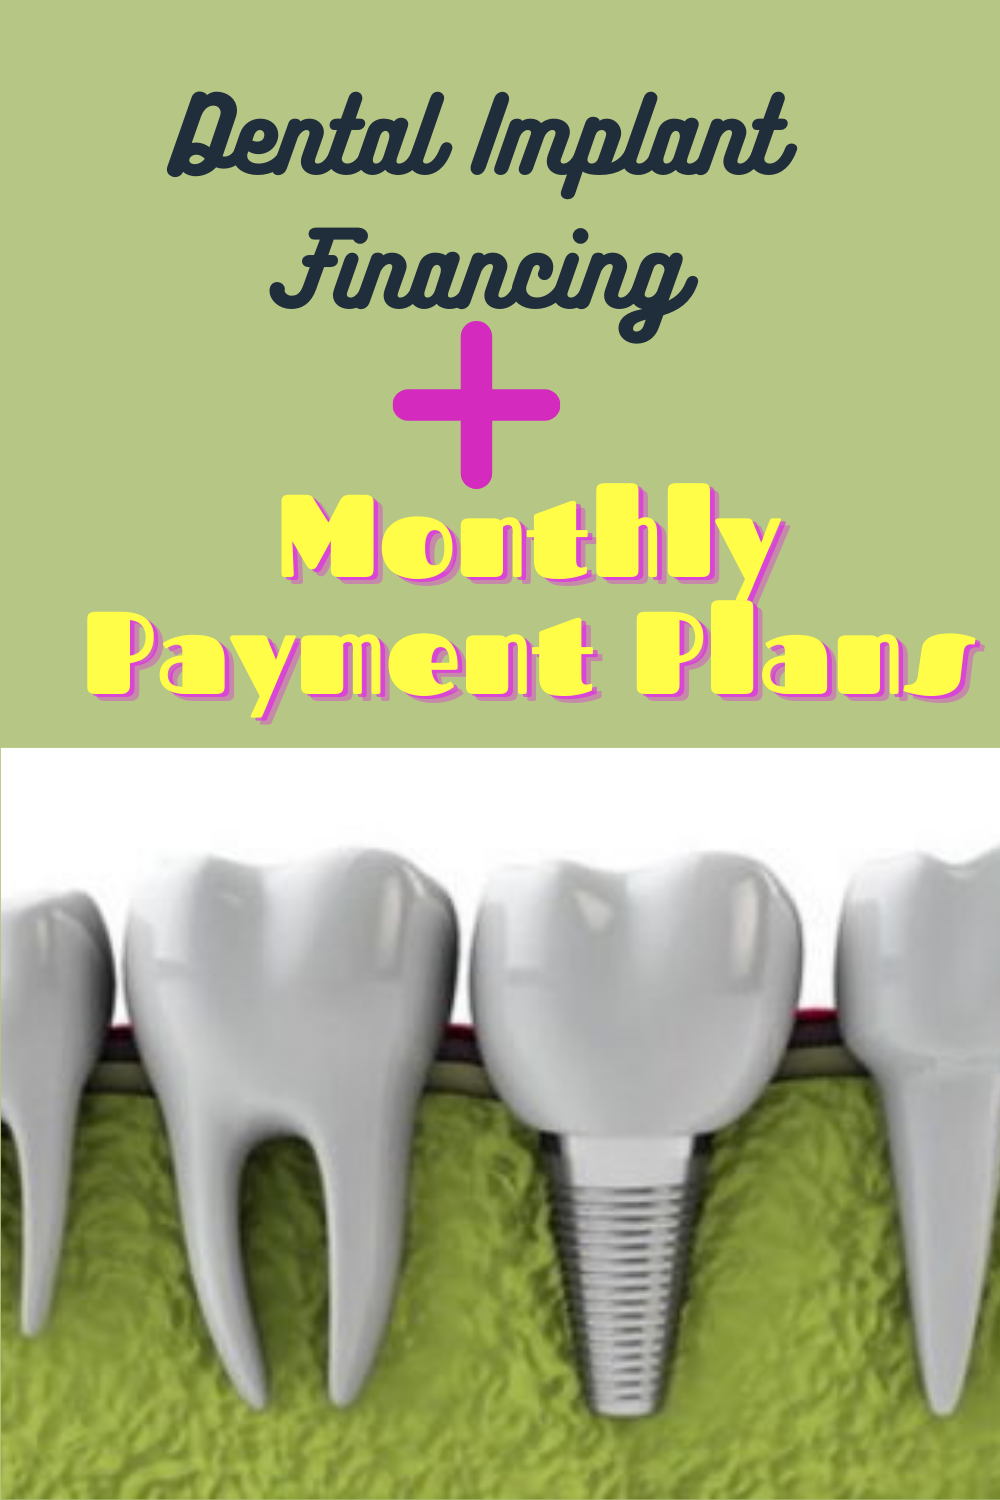 Dental Insurance No Waiting Period For Dentures ...